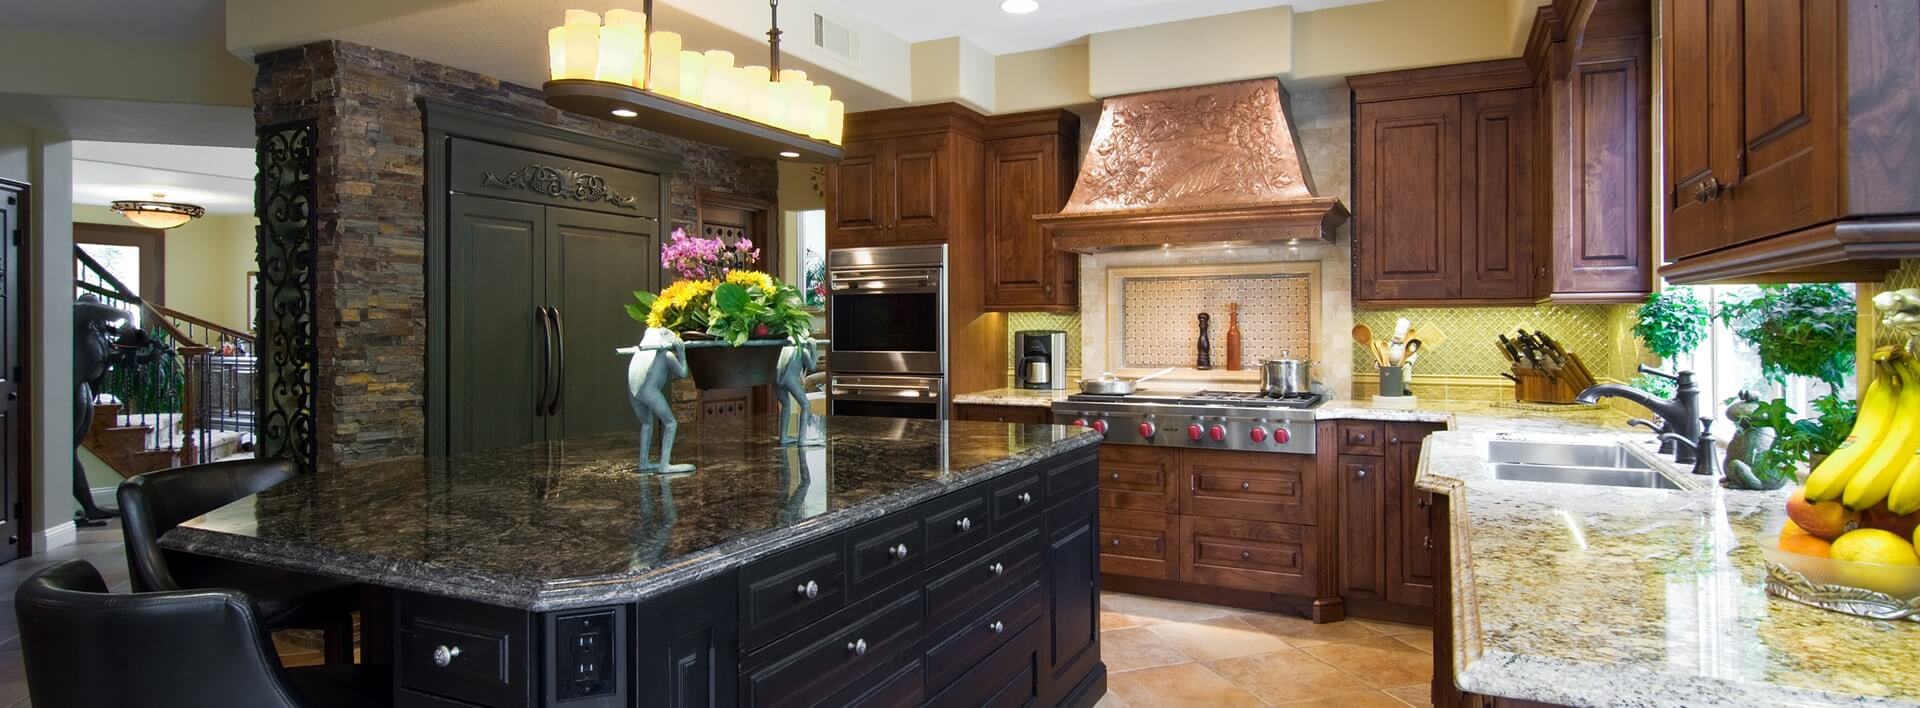 Kitchen design with two tone cabinets